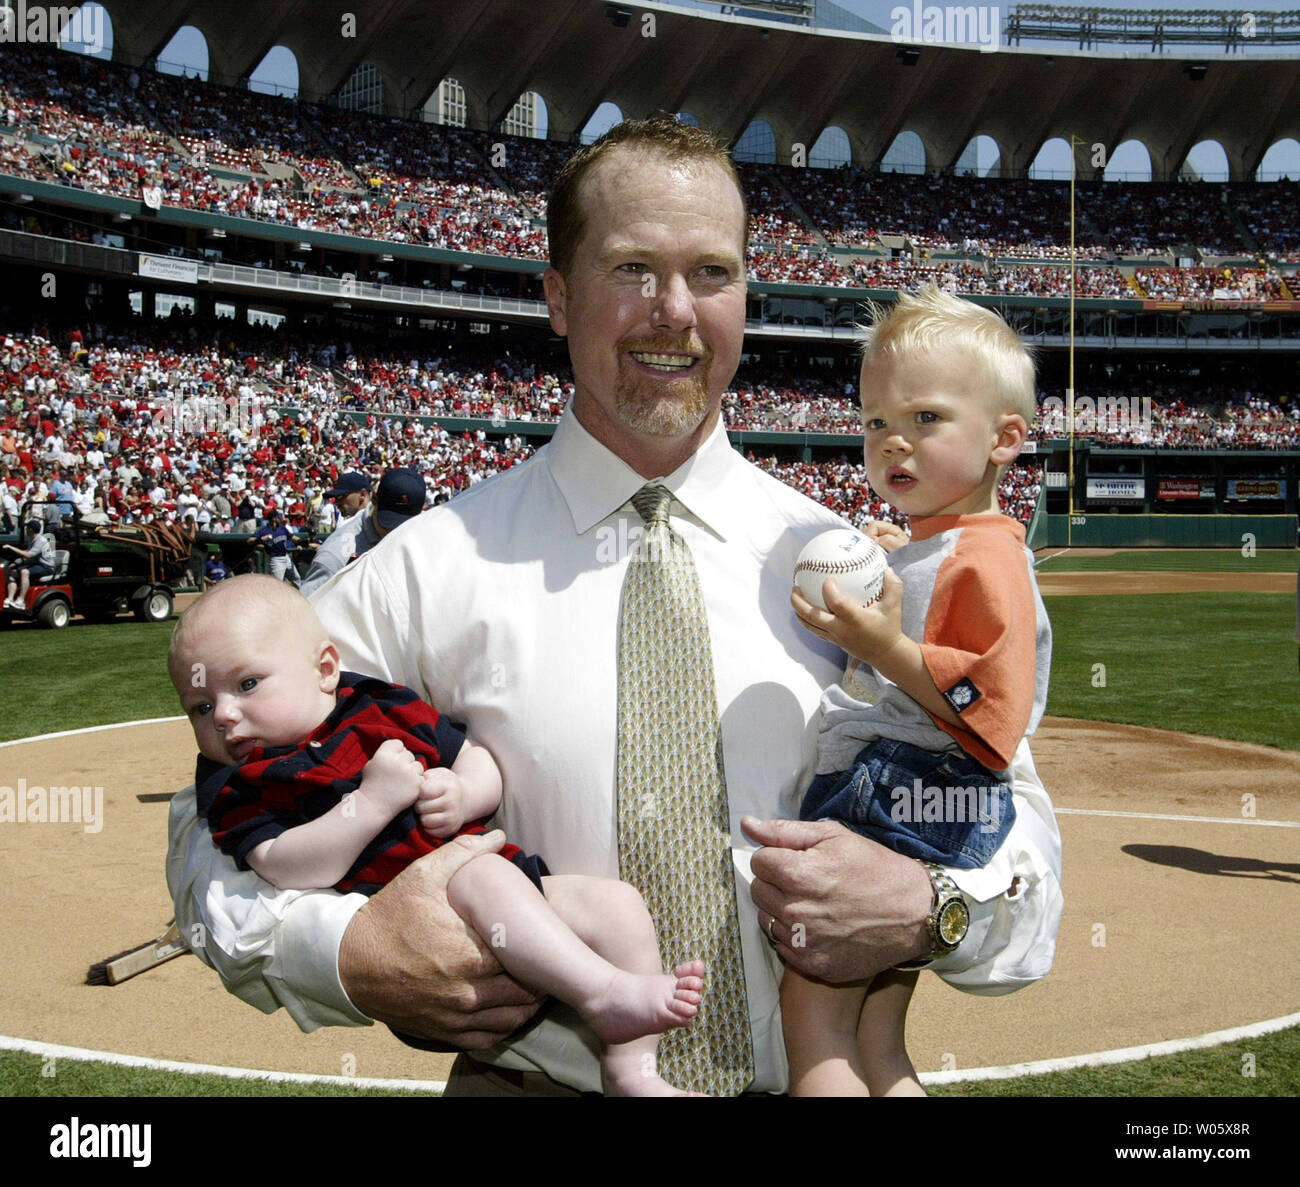 Former St. Louis Cardinals slugger Mark McGwire holds sons three-month-old  Mason (L) and 18 month -old Max during an appearance at Busch Stadium in  St. Louis on April 17, 2004. McGwire returned